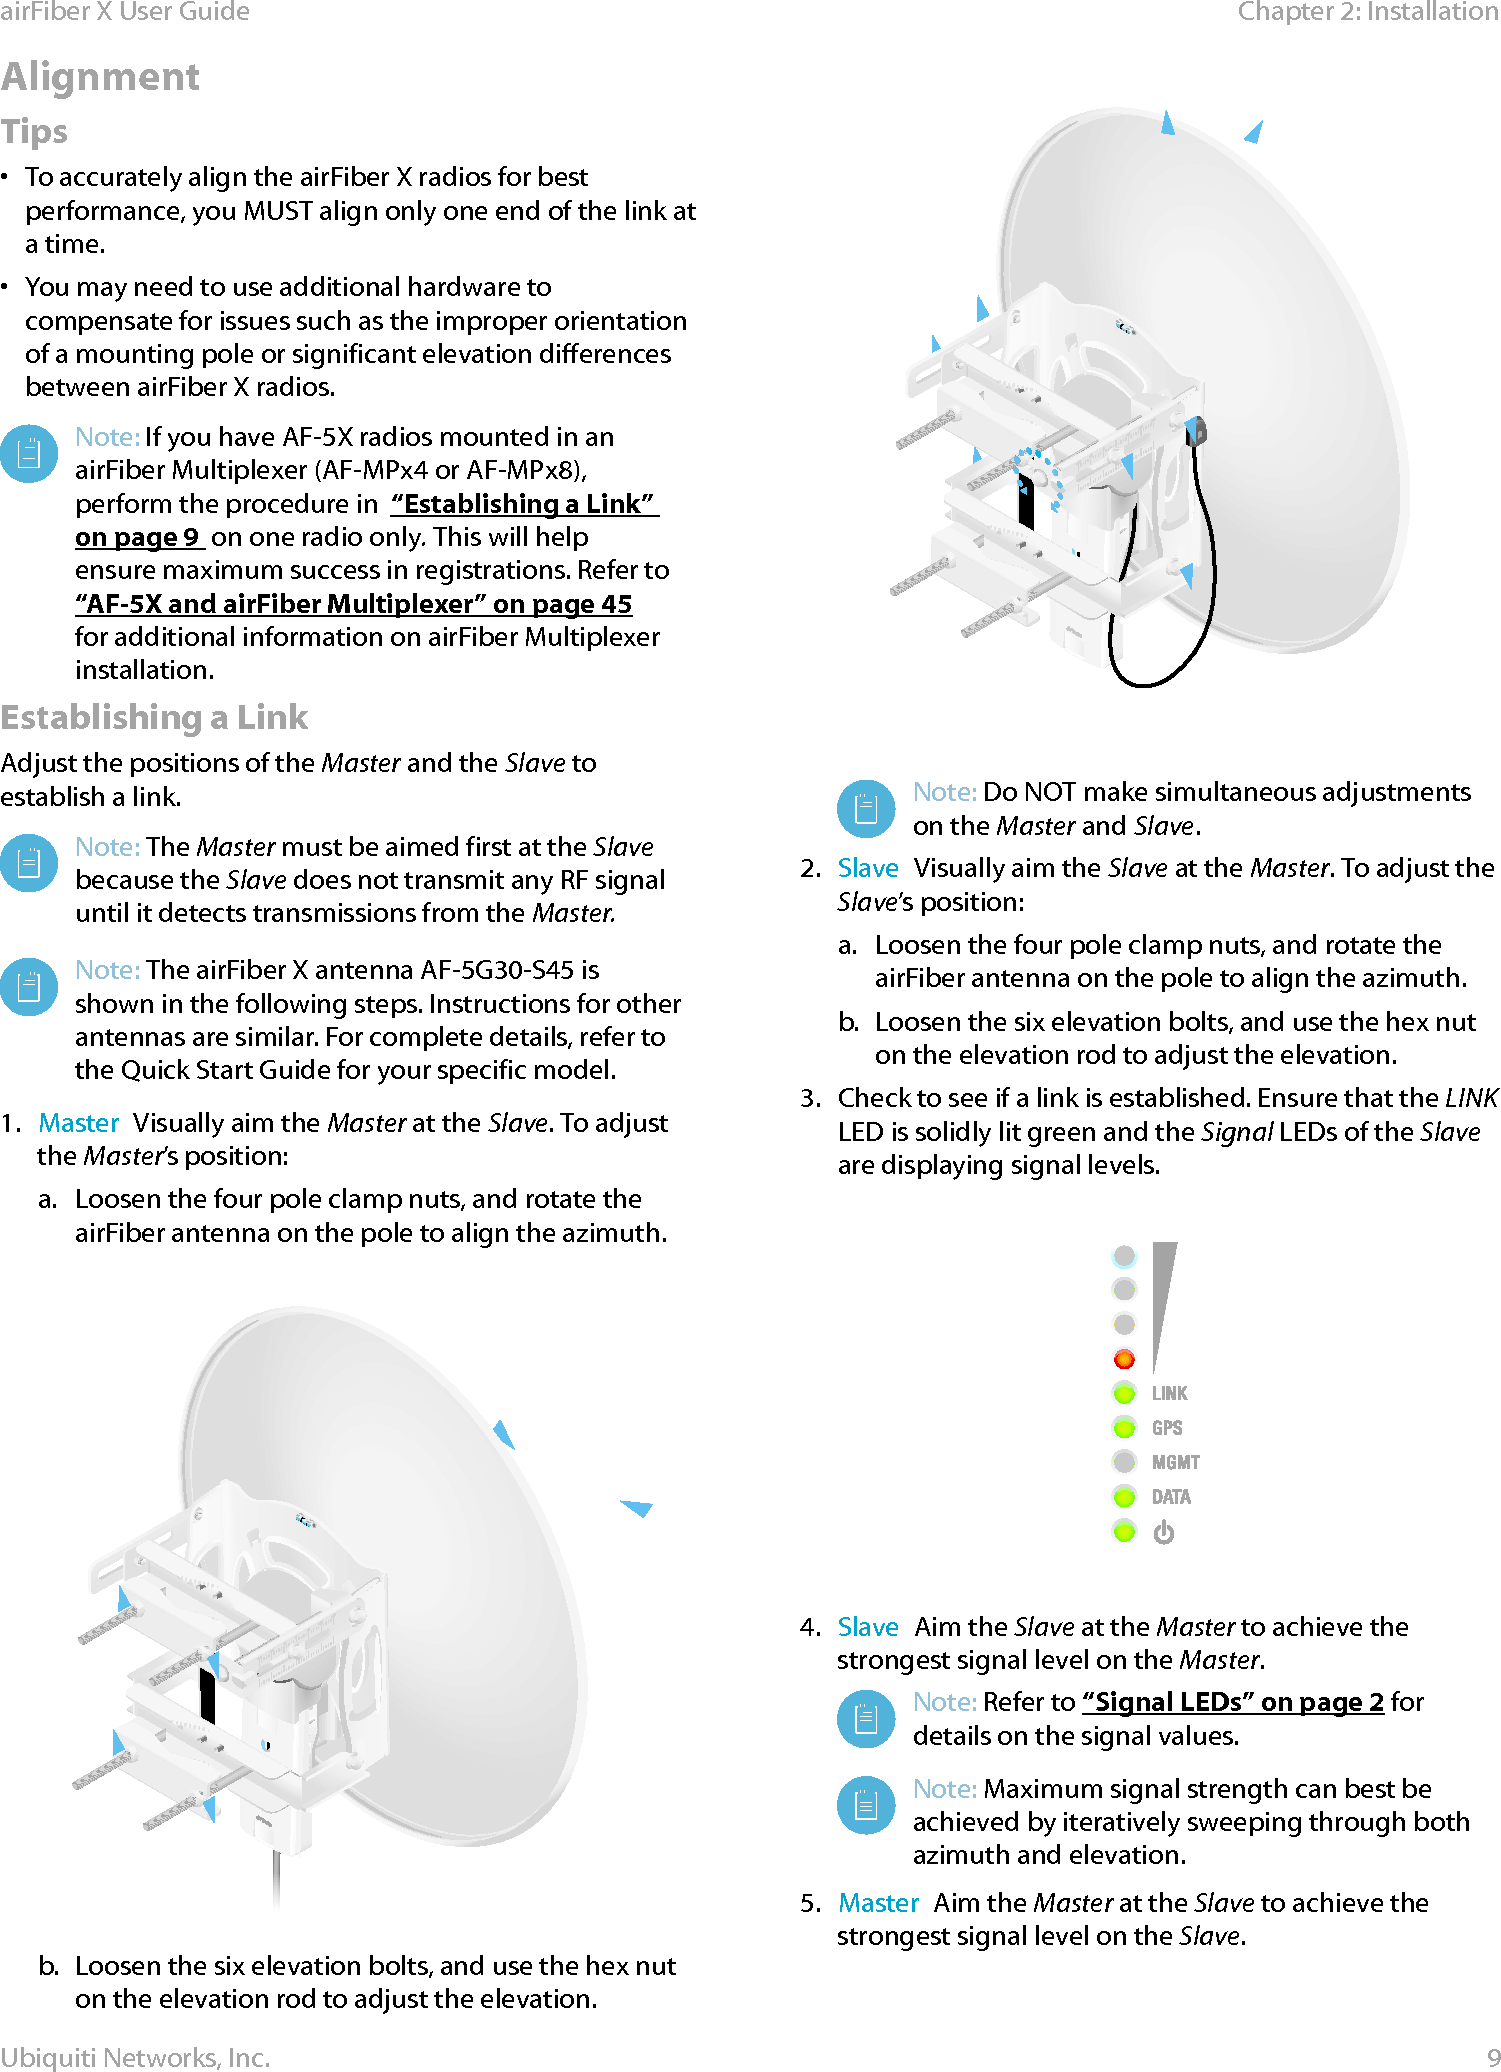 9Chapter 2: InstallationairFiber X User GuideUbiquiti Networks, Inc.Alignment Tips•  To accurately align the airFiberX radios for best performance, you MUST align only one end of the link at a time.•  You may need to use additional hardware to compensate for issues such as the improper orientation of a mounting pole or significant elevation differences between airFiberX radios.Note: If you have AF-5X radios mounted in an airFiber Multiplexer (AF-MPx4 or AF-MPx8), perform the procedure in  “Establishing a Link” on page9  on one radio only. This will help ensure maximum success in registrations. Refer to “AF-5X and airFiber Multiplexer” on page 45 for additional information on airFiber Multiplexer installation.Establishing a LinkAdjust the positions of the Master and the Slave to establish a link. Note: The Master must be aimed first at the Slave because the Slave does not transmit any RF signal until it detects transmissions from the Master. Note: The airFiber X antenna AF-5G30-S45 is shown in the following steps. Instructions for other antennas are similar. For complete details, refer to the Quick Start Guide for your specific model.1.  Master  Visually aim the Master at the Slave. To adjust the Master’s position:a.  Loosen the four pole clamp nuts, and rotate the airFiber antenna on the pole to align the azimuth.b.  Loosen the six elevation bolts, and use the hex nut on the elevation rod to adjust the elevation.Note: Do NOT make simultaneous adjustments on the Master and Slave. 2.  Slave  Visually aim the Slave at the Master. To adjust the Slave’s position:a.  Loosen the four pole clamp nuts, and rotate the airFiber antenna on the pole to align the azimuth.b.  Loosen the six elevation bolts, and use the hex nut on the elevation rod to adjust the elevation.3.  Check to see if a link is established. Ensure that the LINK LED is solidly lit green and the Signal LEDs of the Slave are displaying signal levels.4.  Slave  Aim the Slave at the Master to achieve the strongest signal level on the Master.Note: Refer to “Signal LEDs” on page 2 for details on the signal values. Note: Maximum signal strength can best be achieved by iteratively sweeping through both azimuth and elevation.5.  Master  Aim the Master at the Slave to achieve the strongest signal level on the Slave.